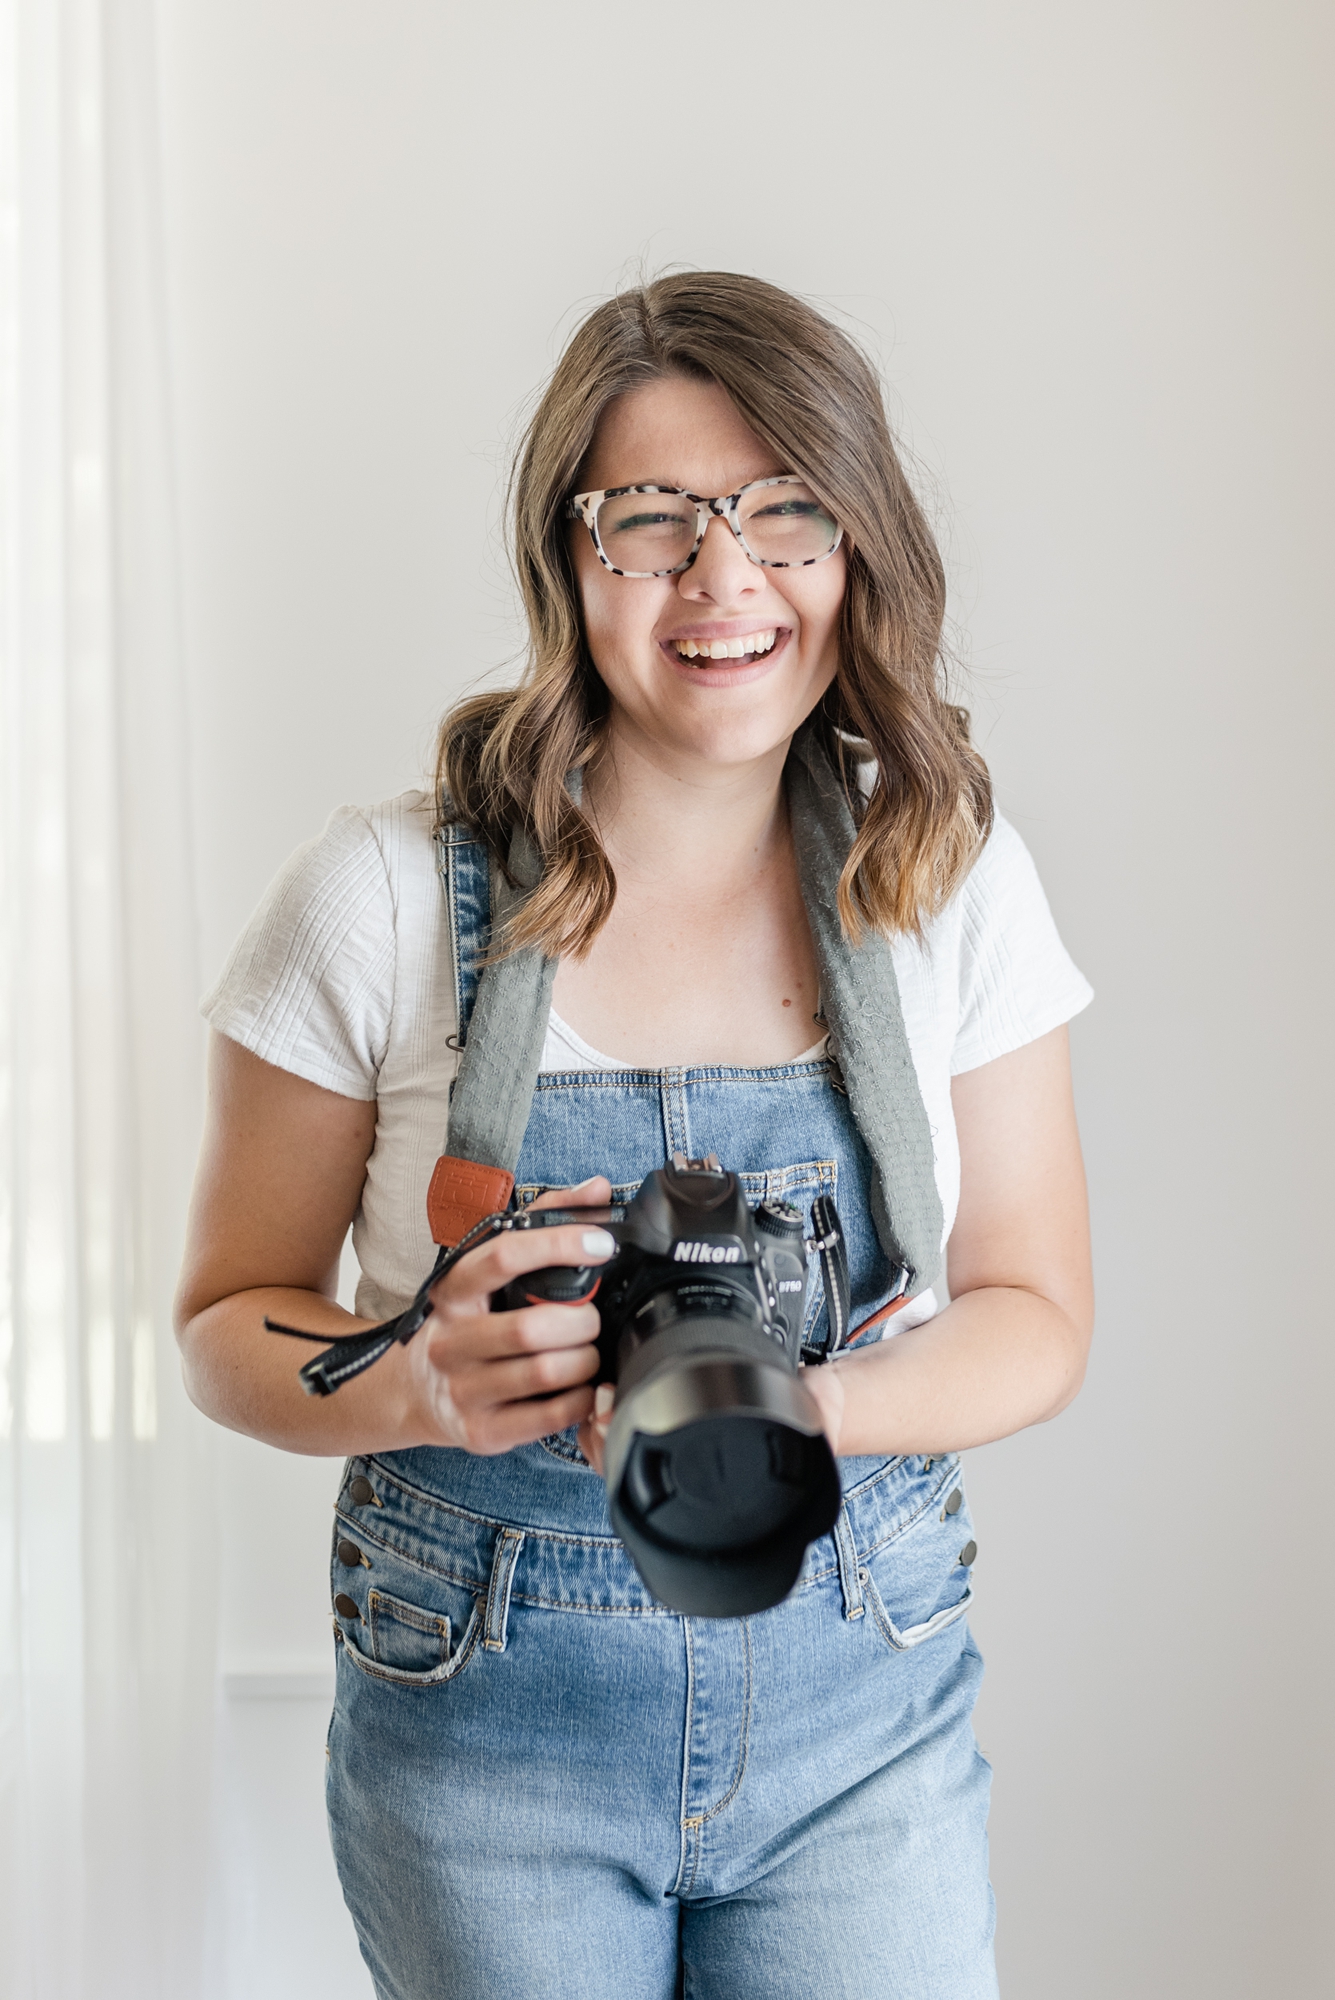 3 Myths You're Believing About Growing Your Photography Business: Business educator Stephanie Kase shares myths that are keep you from growing your biz